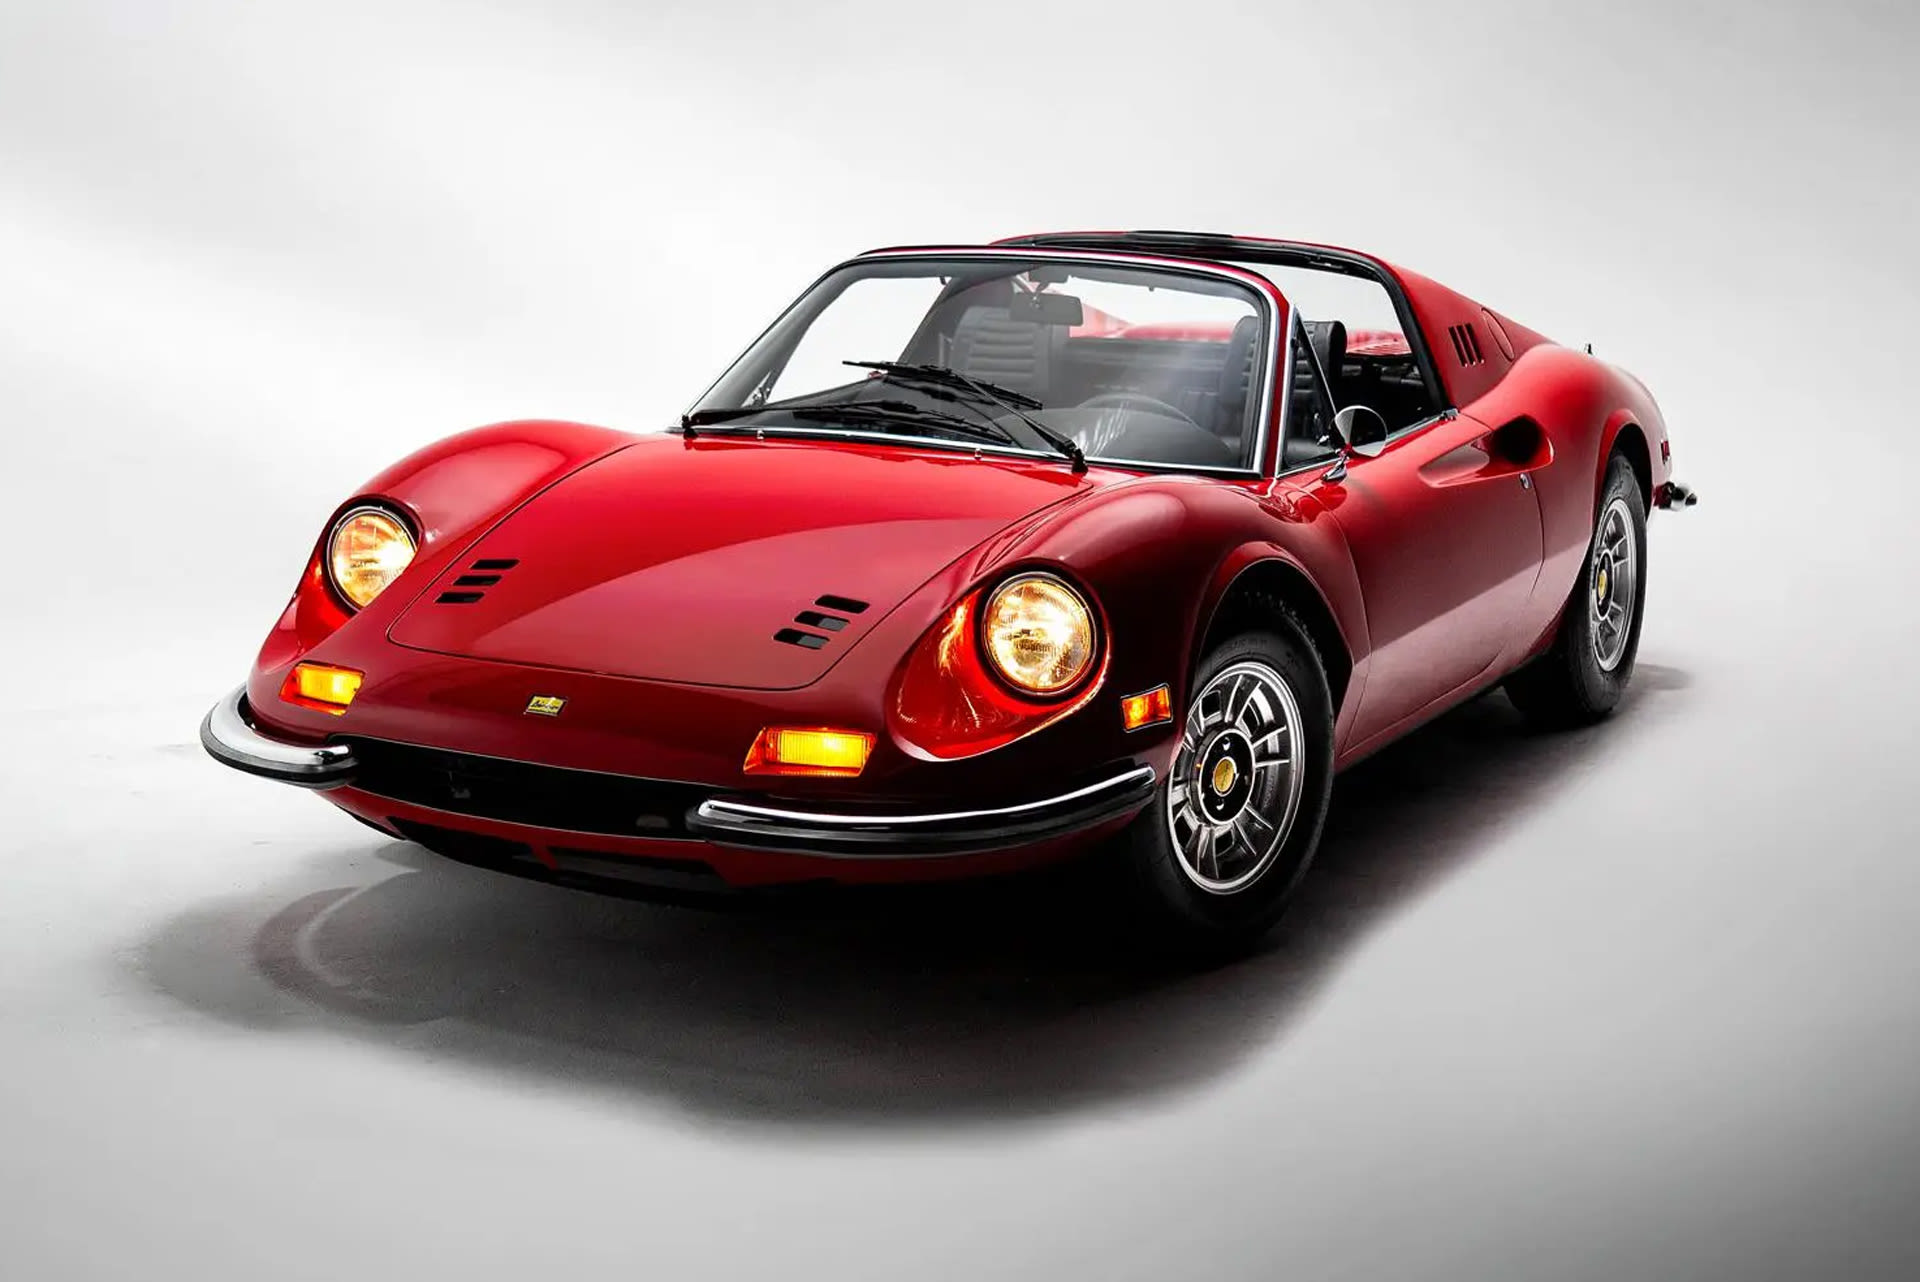 Ferrari Dino once owned by Cher up for sale